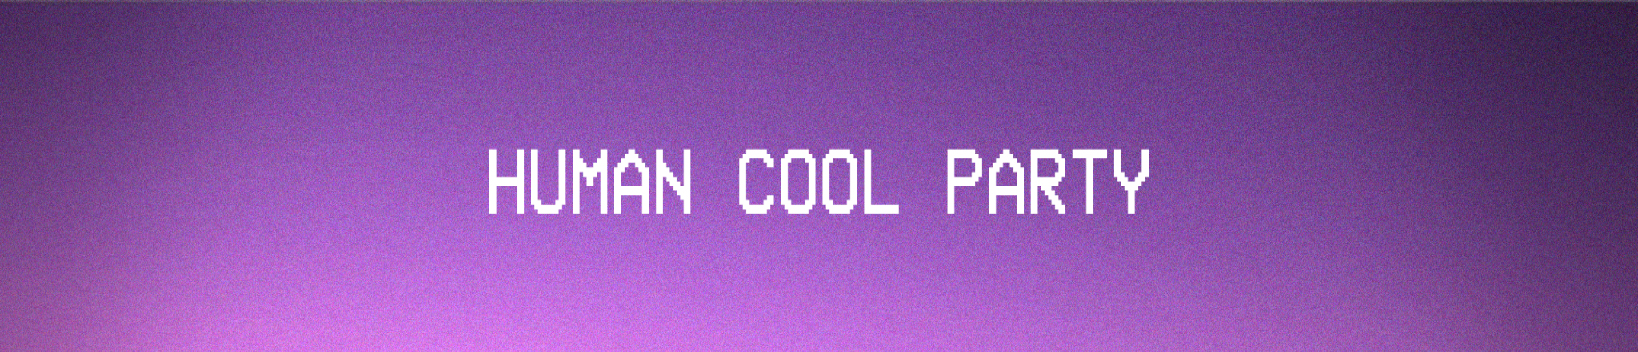 Human Cool Party